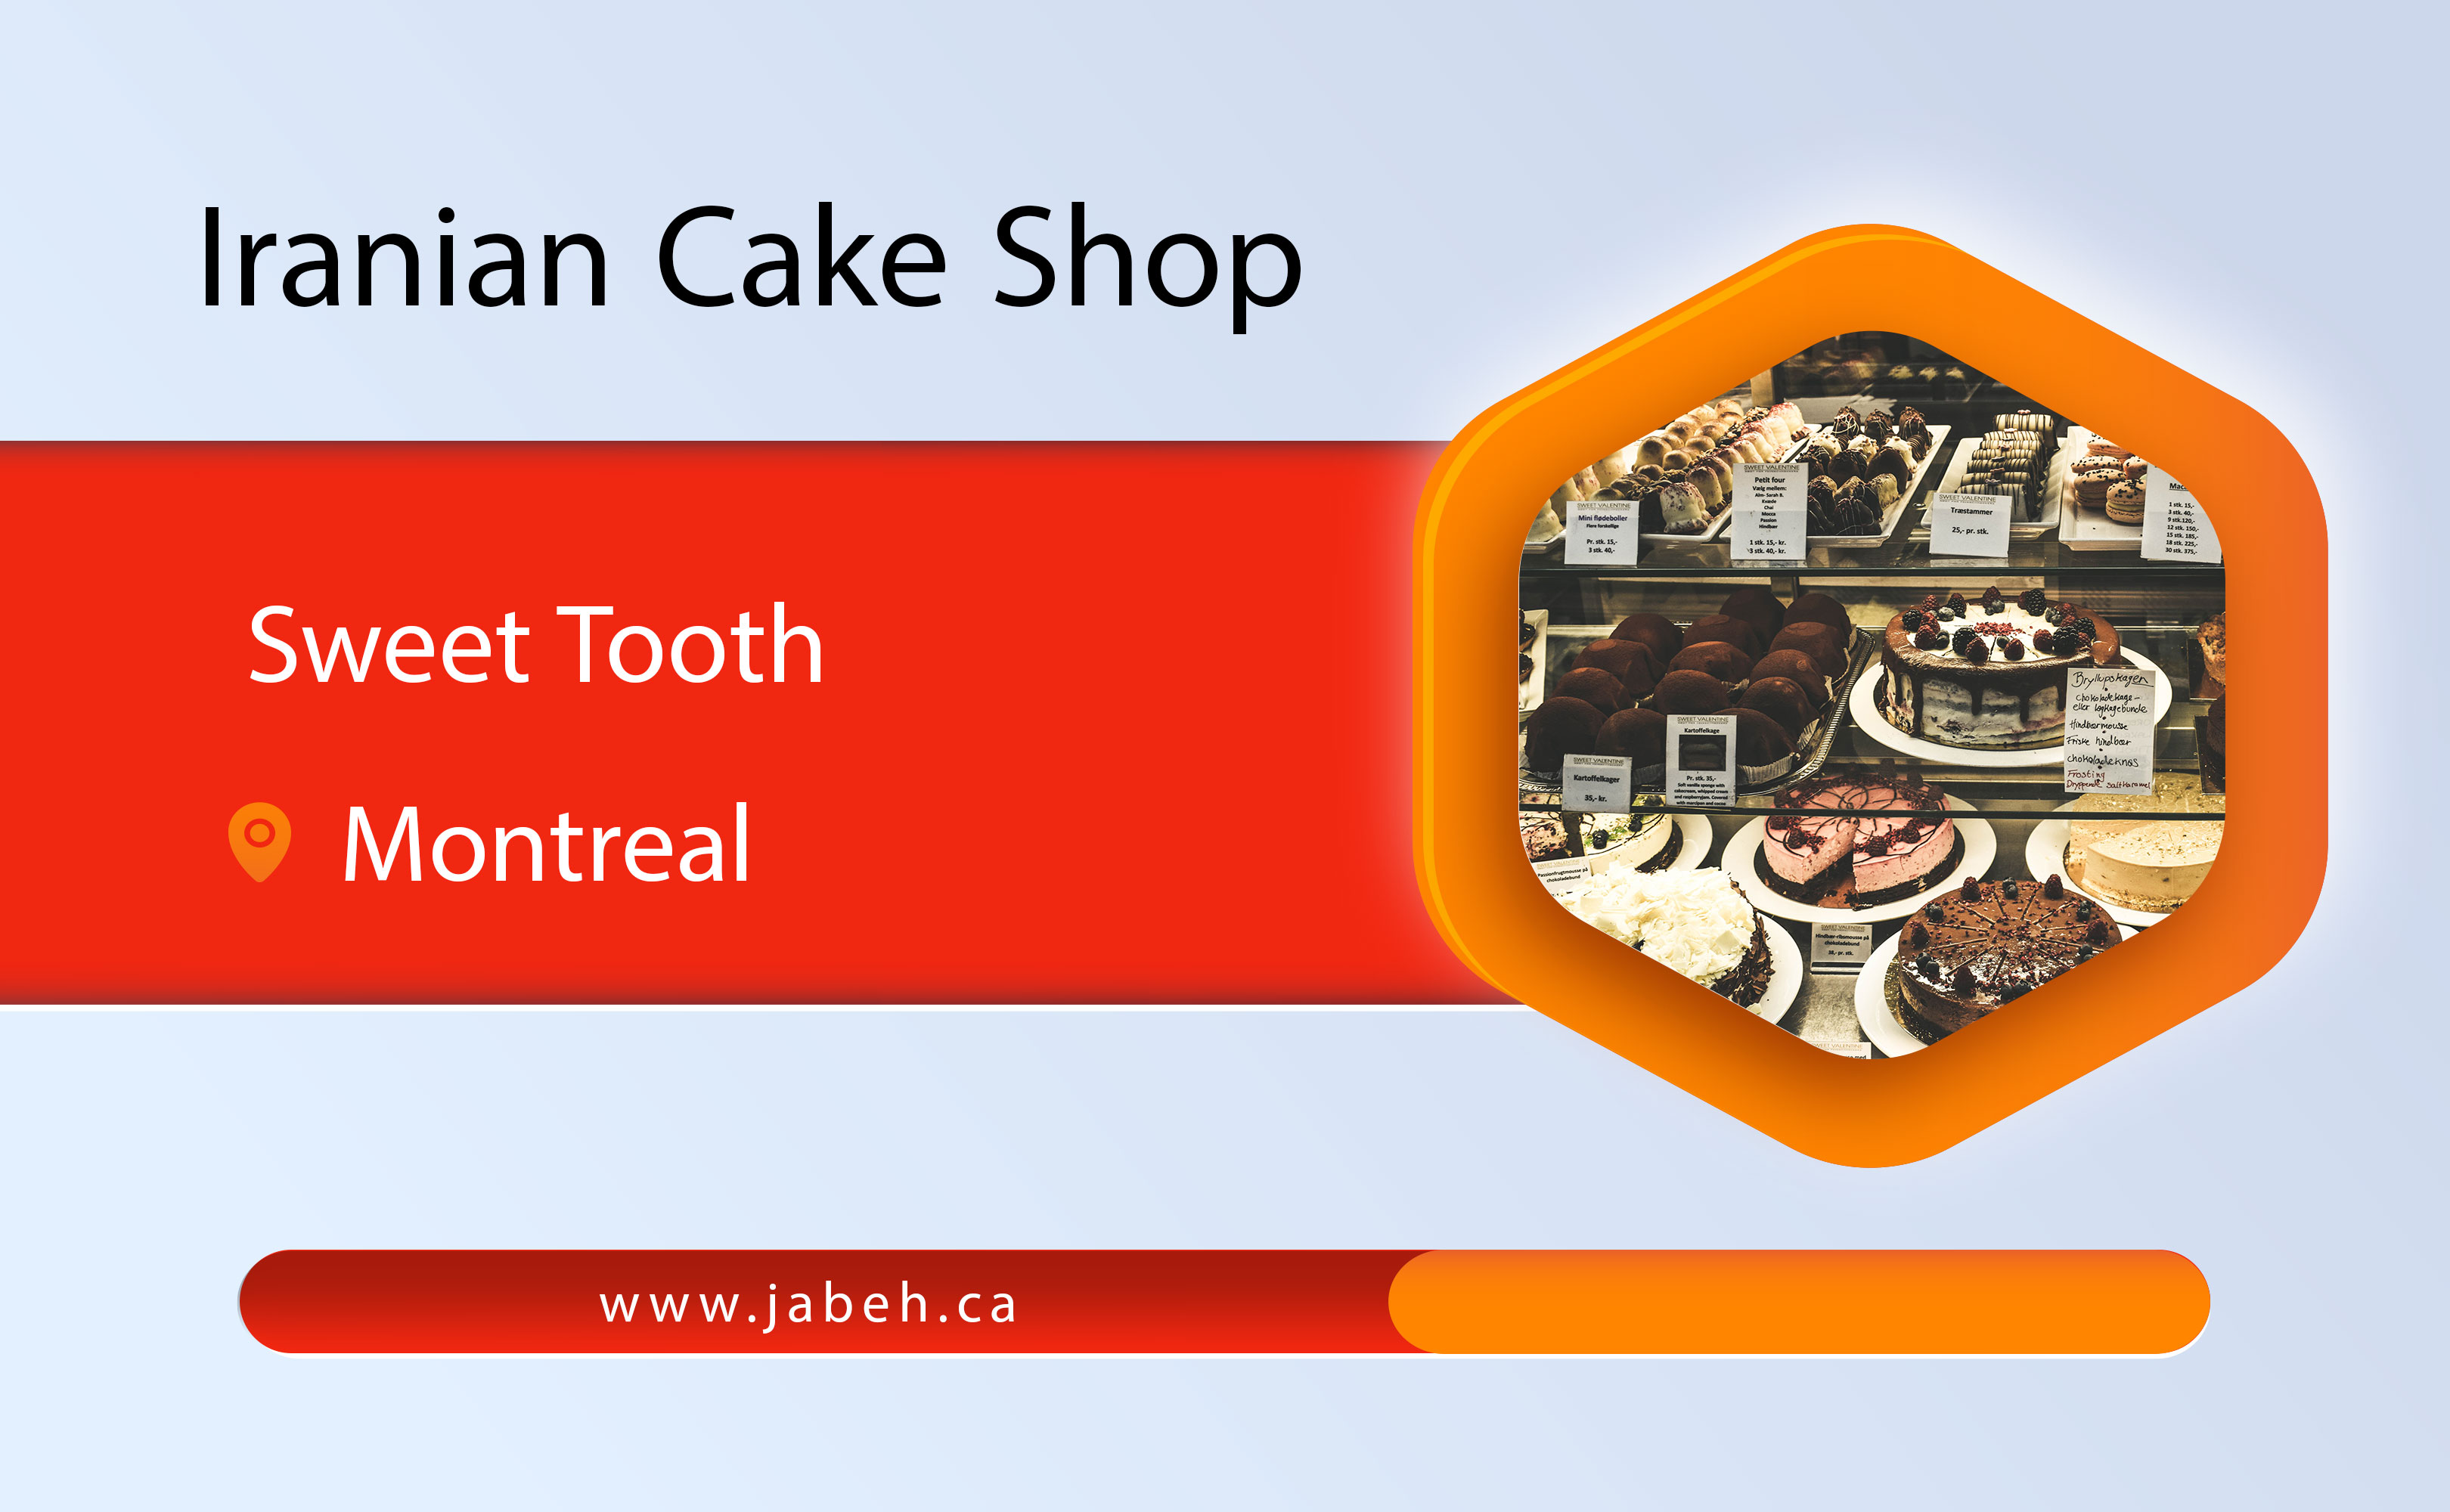 Iranian sweet tooth cake shop in Montreal